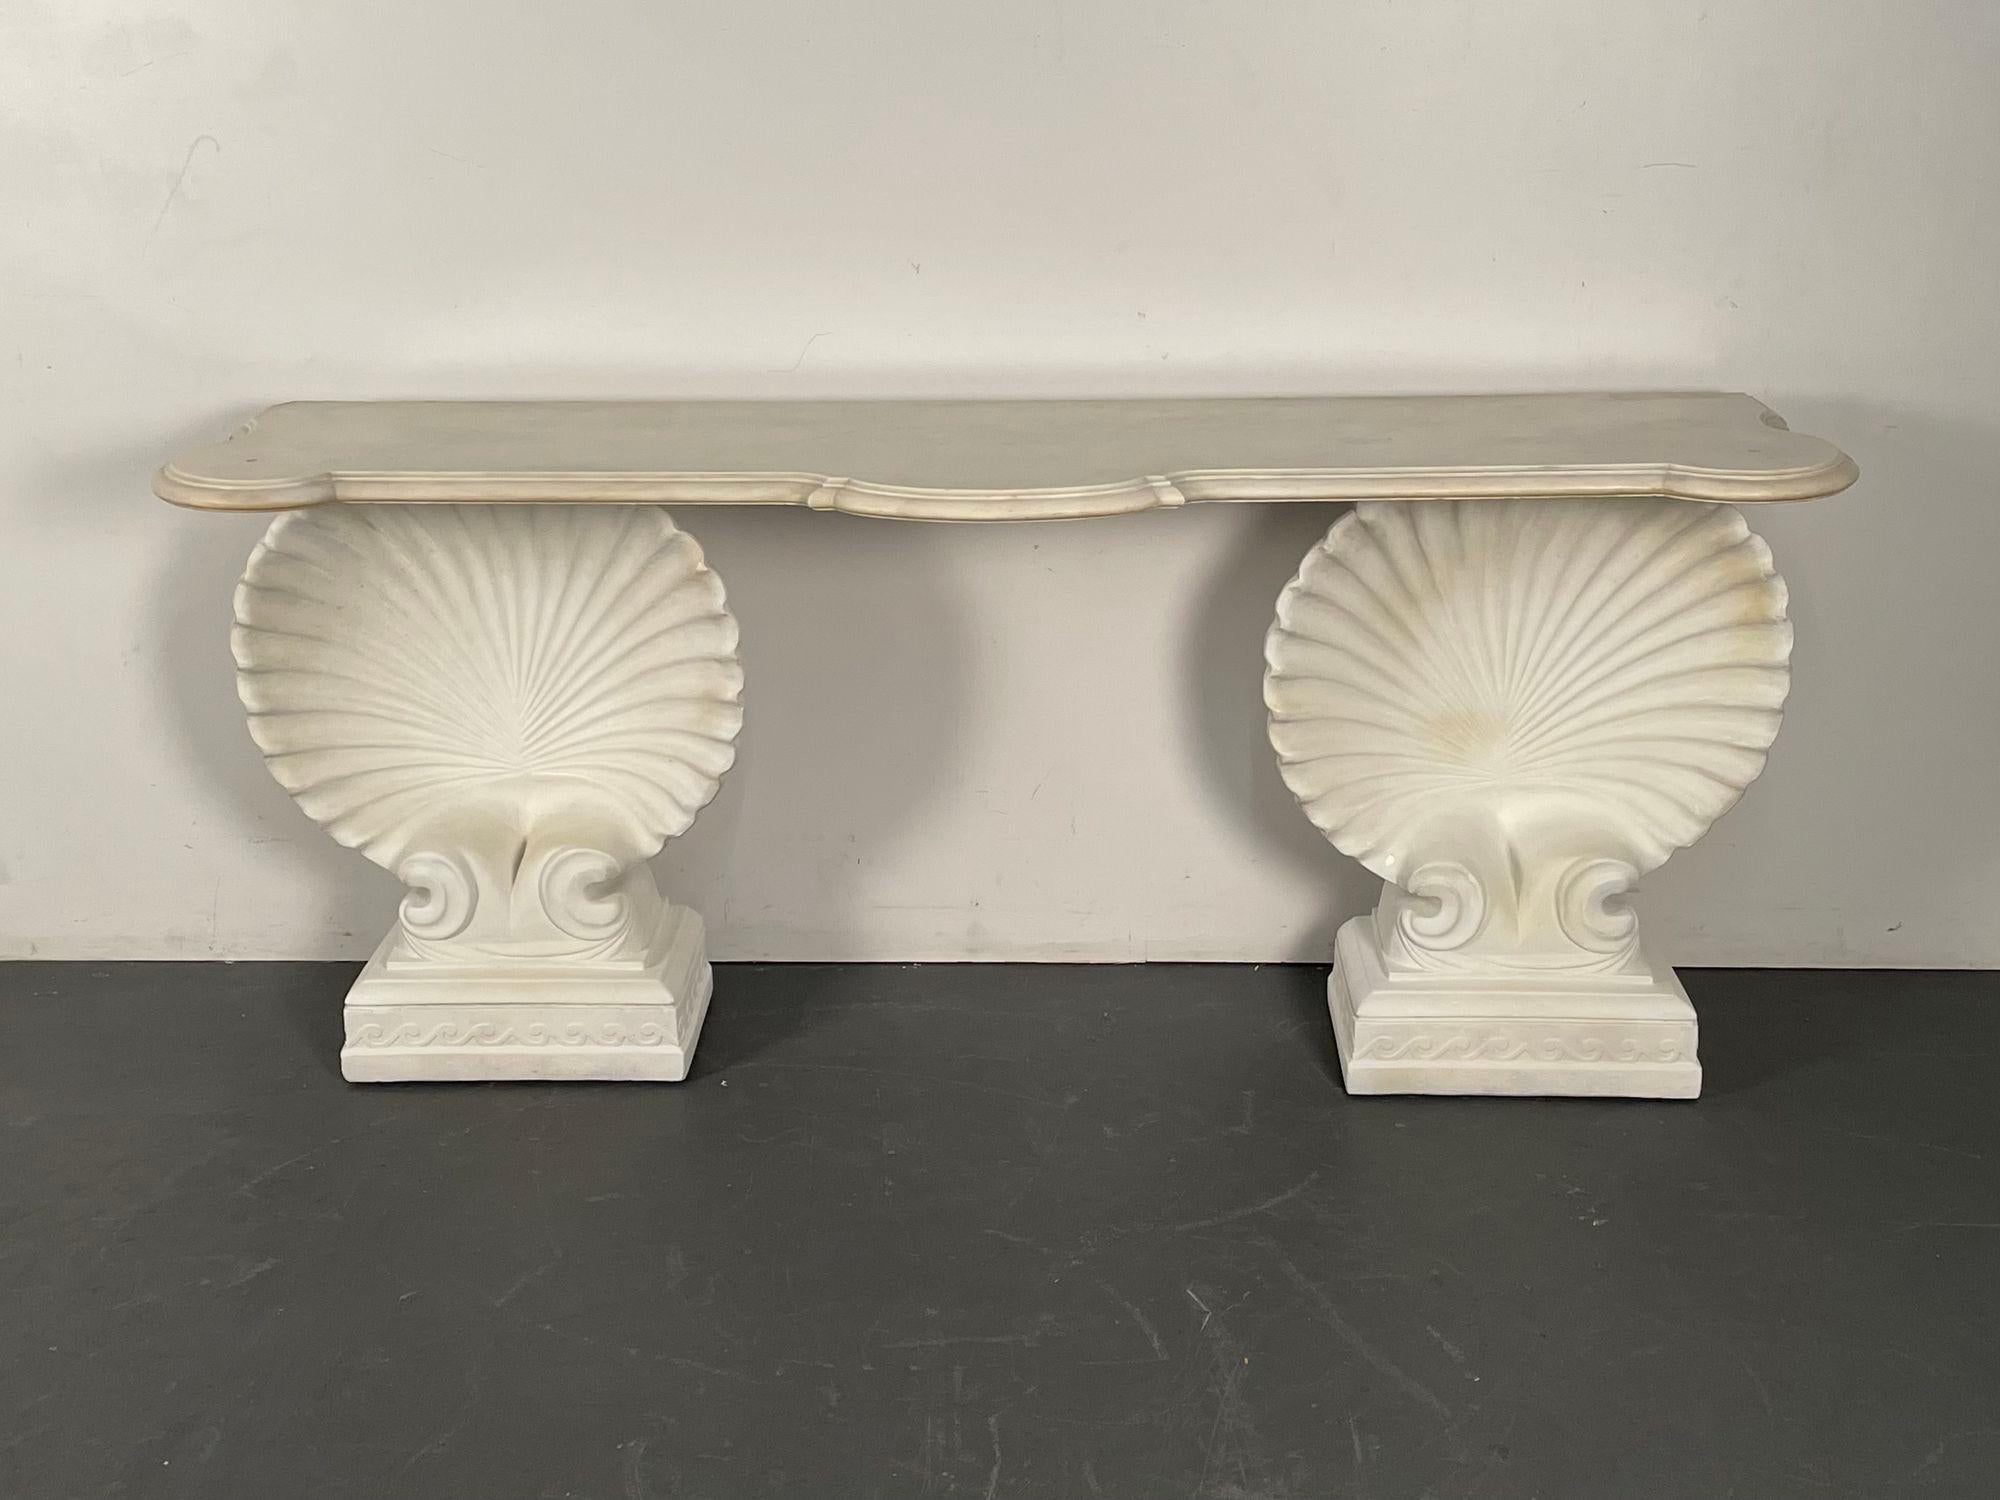 Cast Stone Shell Console Table, Marble and Stone Pedestal, Early 20th Century, Industrial